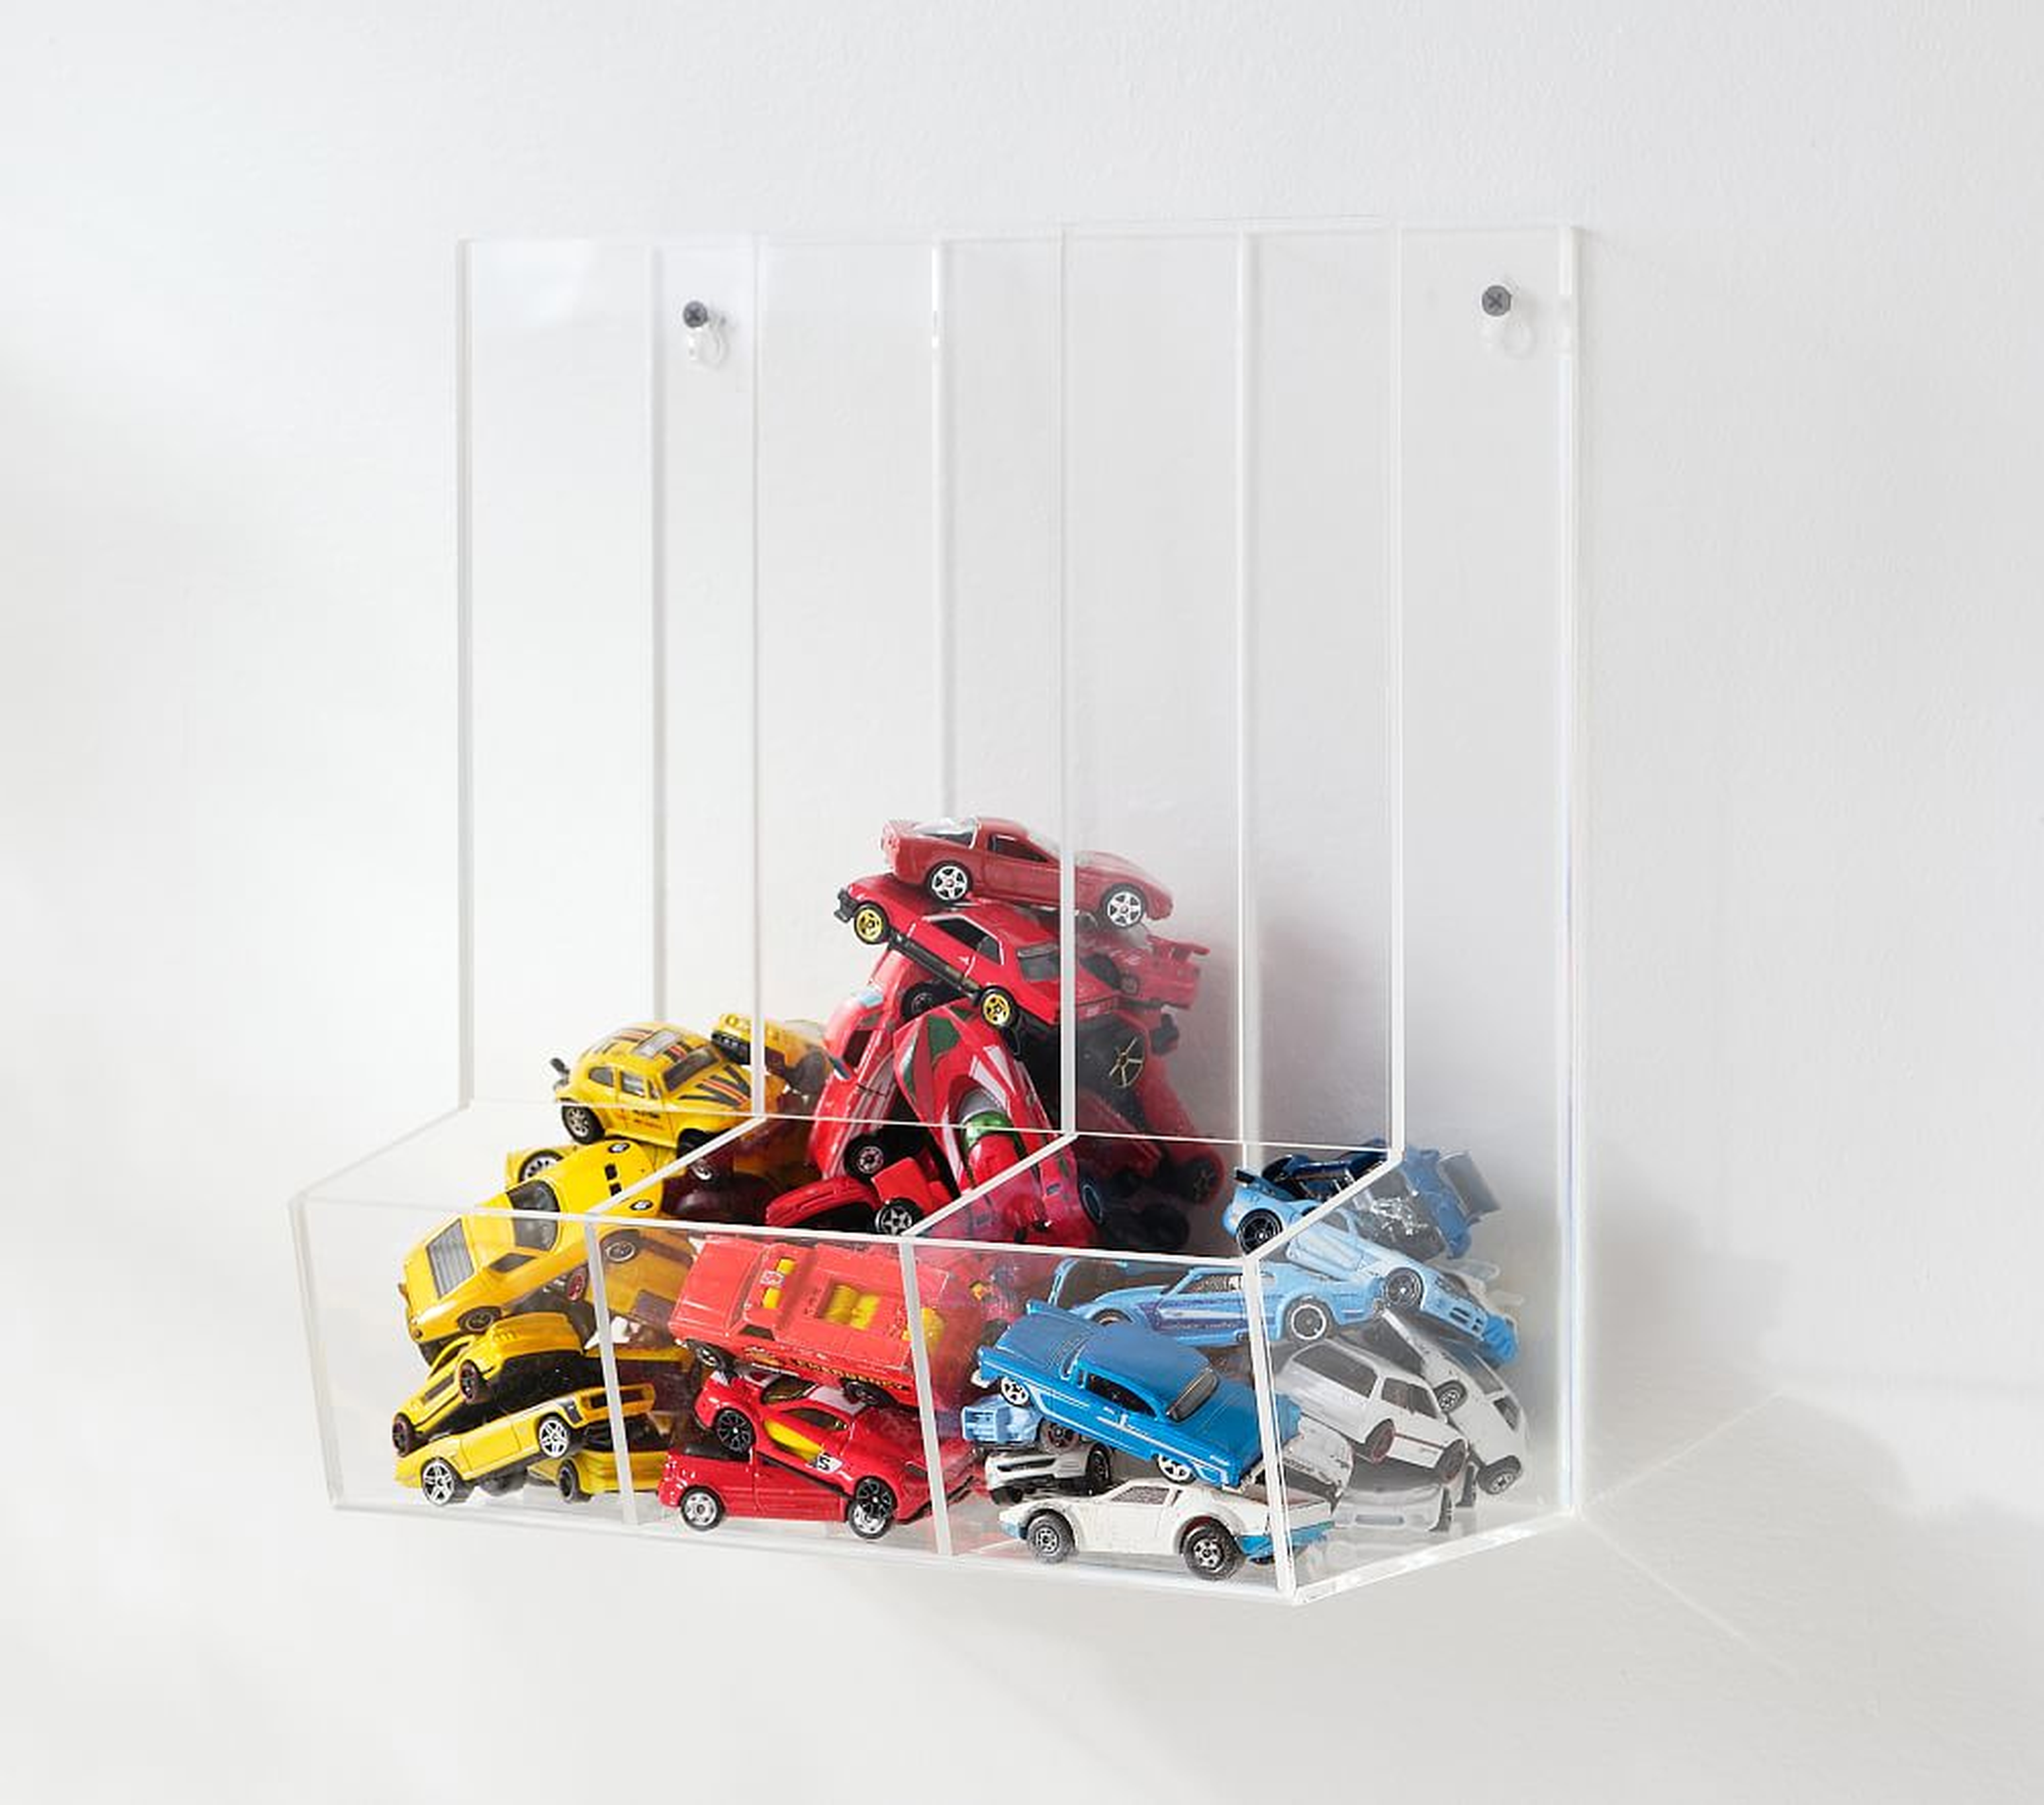 Acrylic Divided Toy Dispenser - Pottery Barn Kids